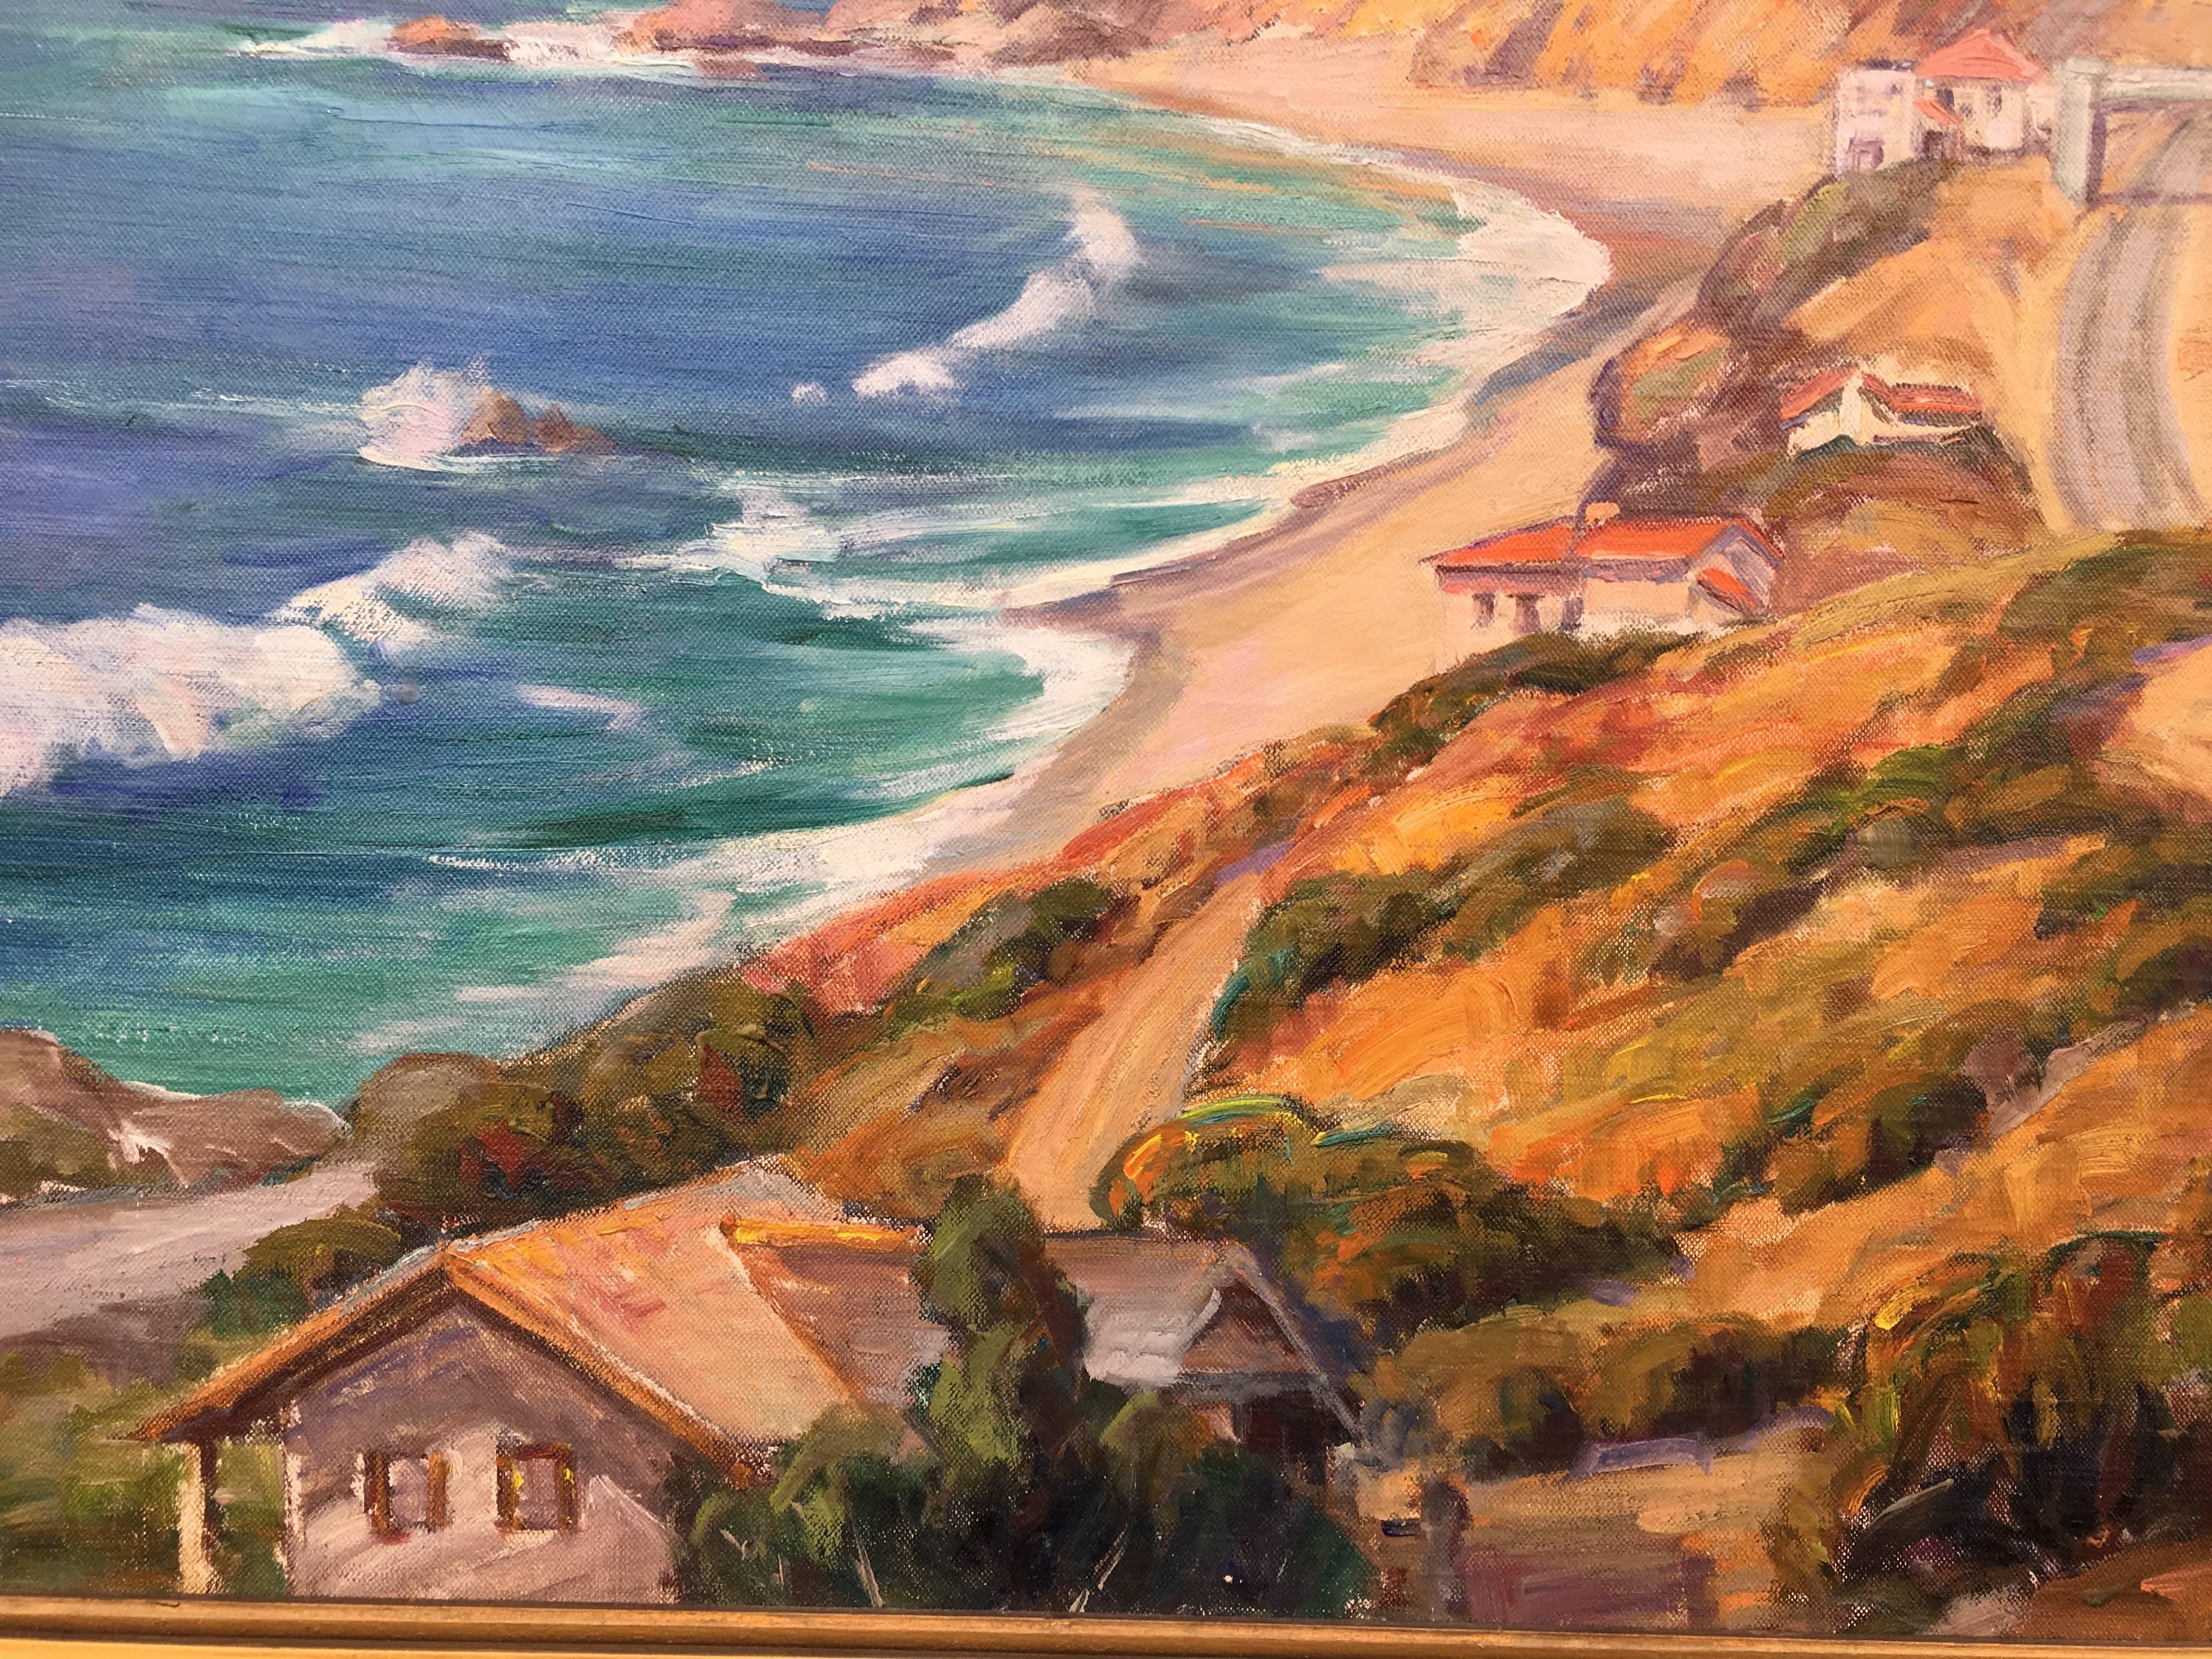 A landscape painter, Evylena Miller was born in Mayfield, Kansas where she spent the first fifteen years of her life. In 1903, she moved to Santa Ana, California and earned her B.A. degree from Pomona College and studied with Anna Althea Hills and